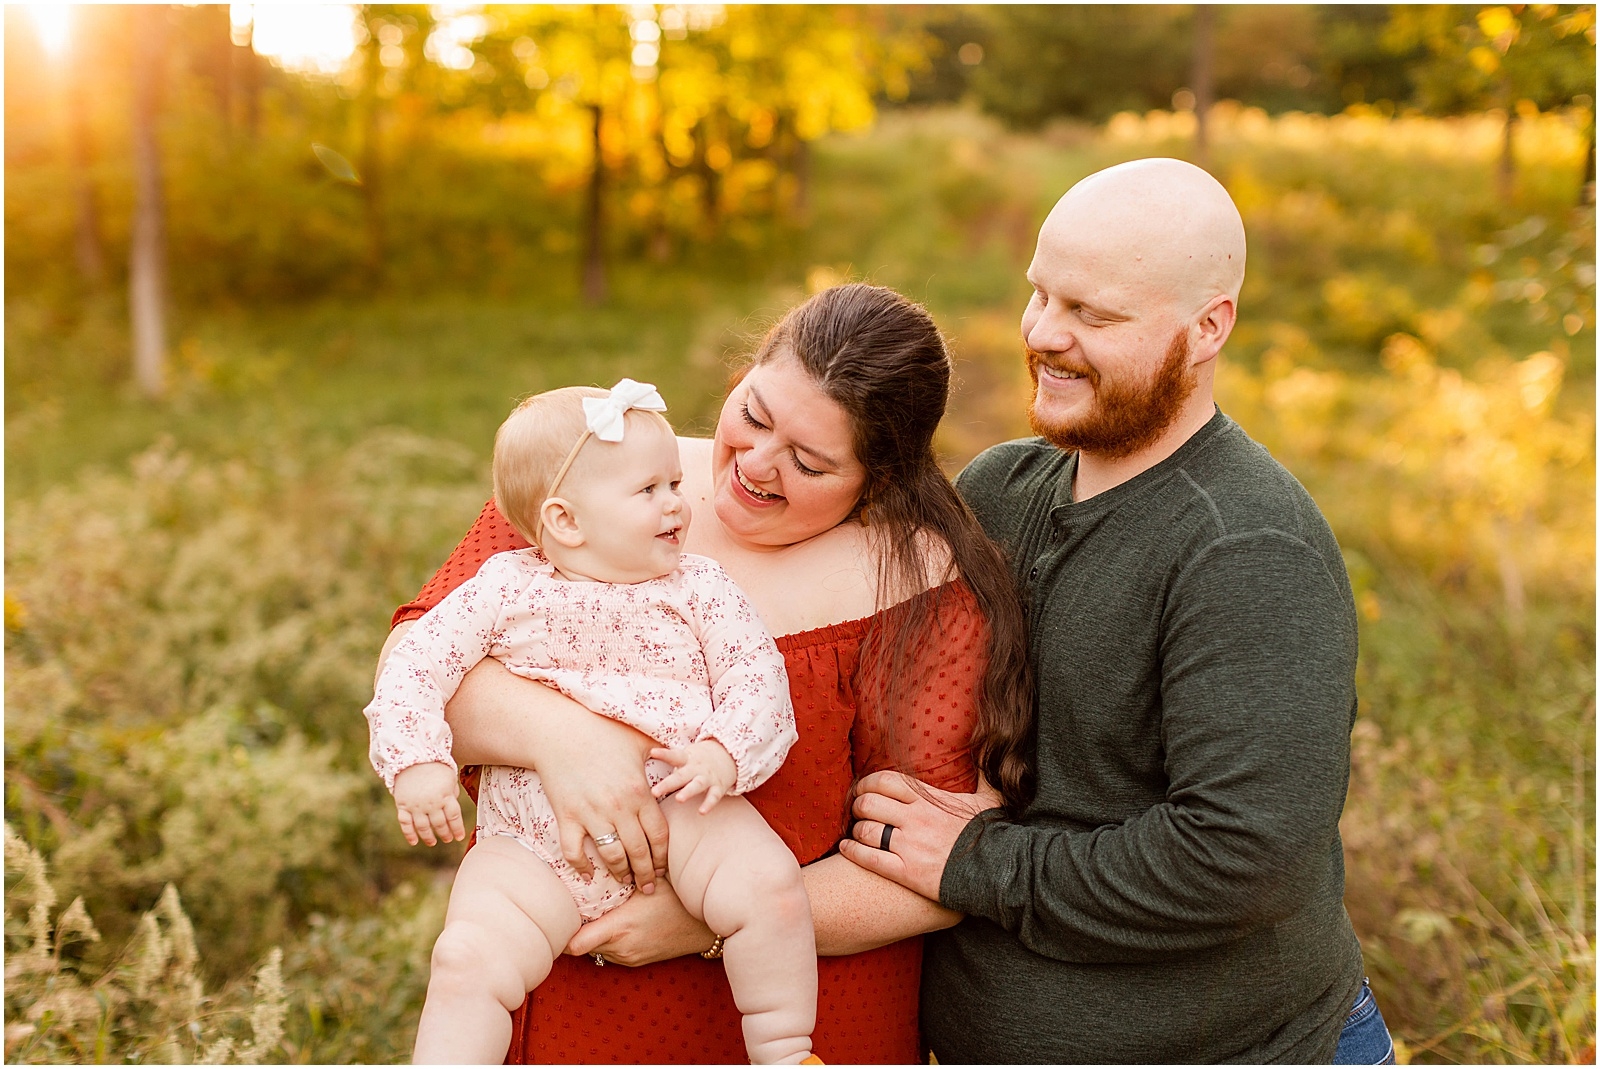 The Peck's Fall Family Session Bret and Brandie Photography | Evansville Indiana Wedding Photographers_0003.jpg